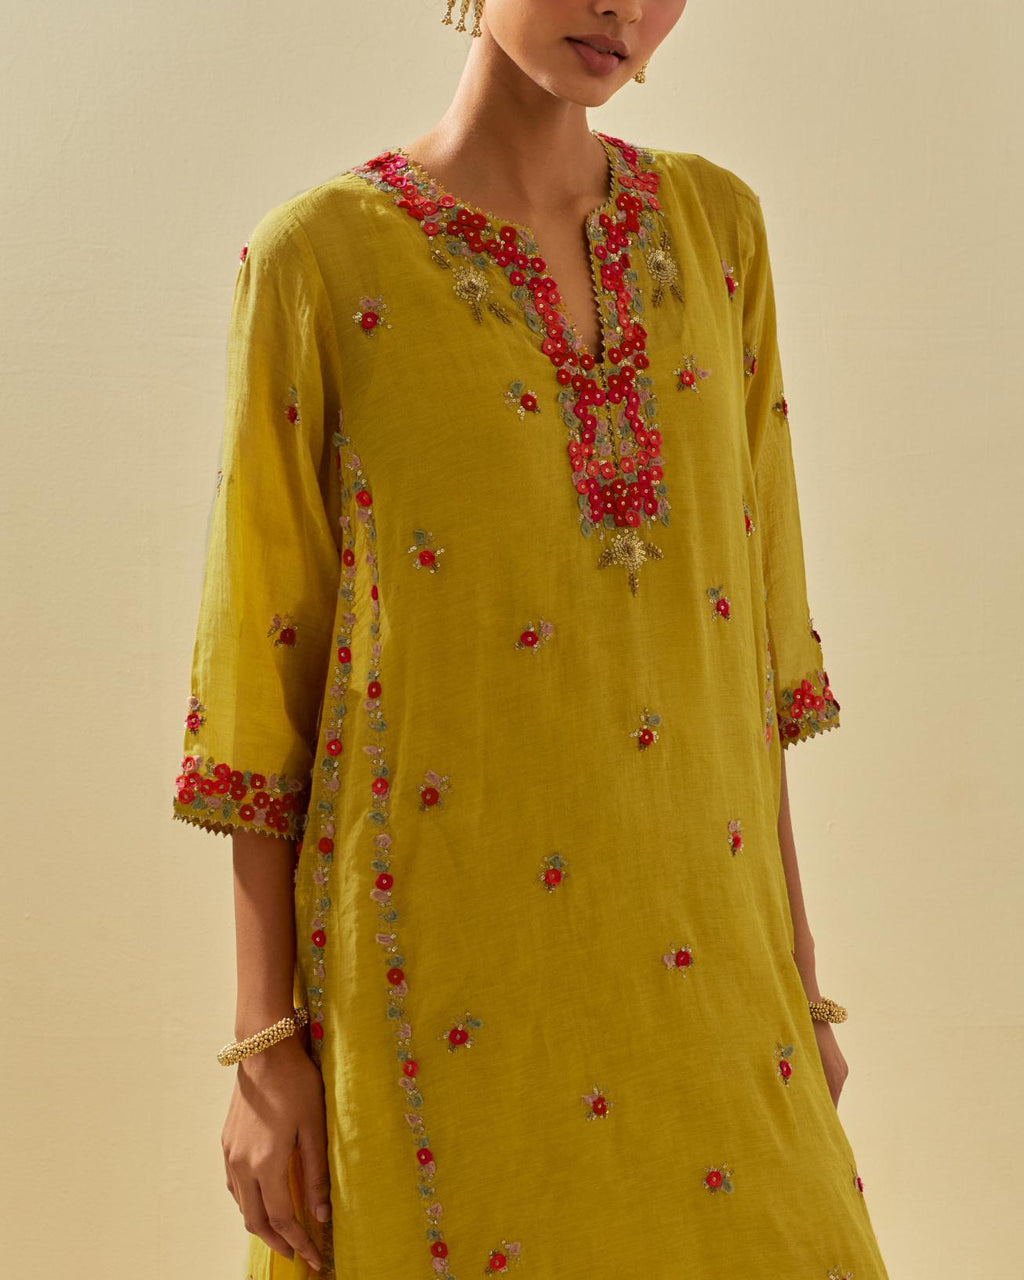 Yellow tissue chanderi mid length kalidar kurta set with hand cut silk flower embroidery, highlighted with gold sequins.